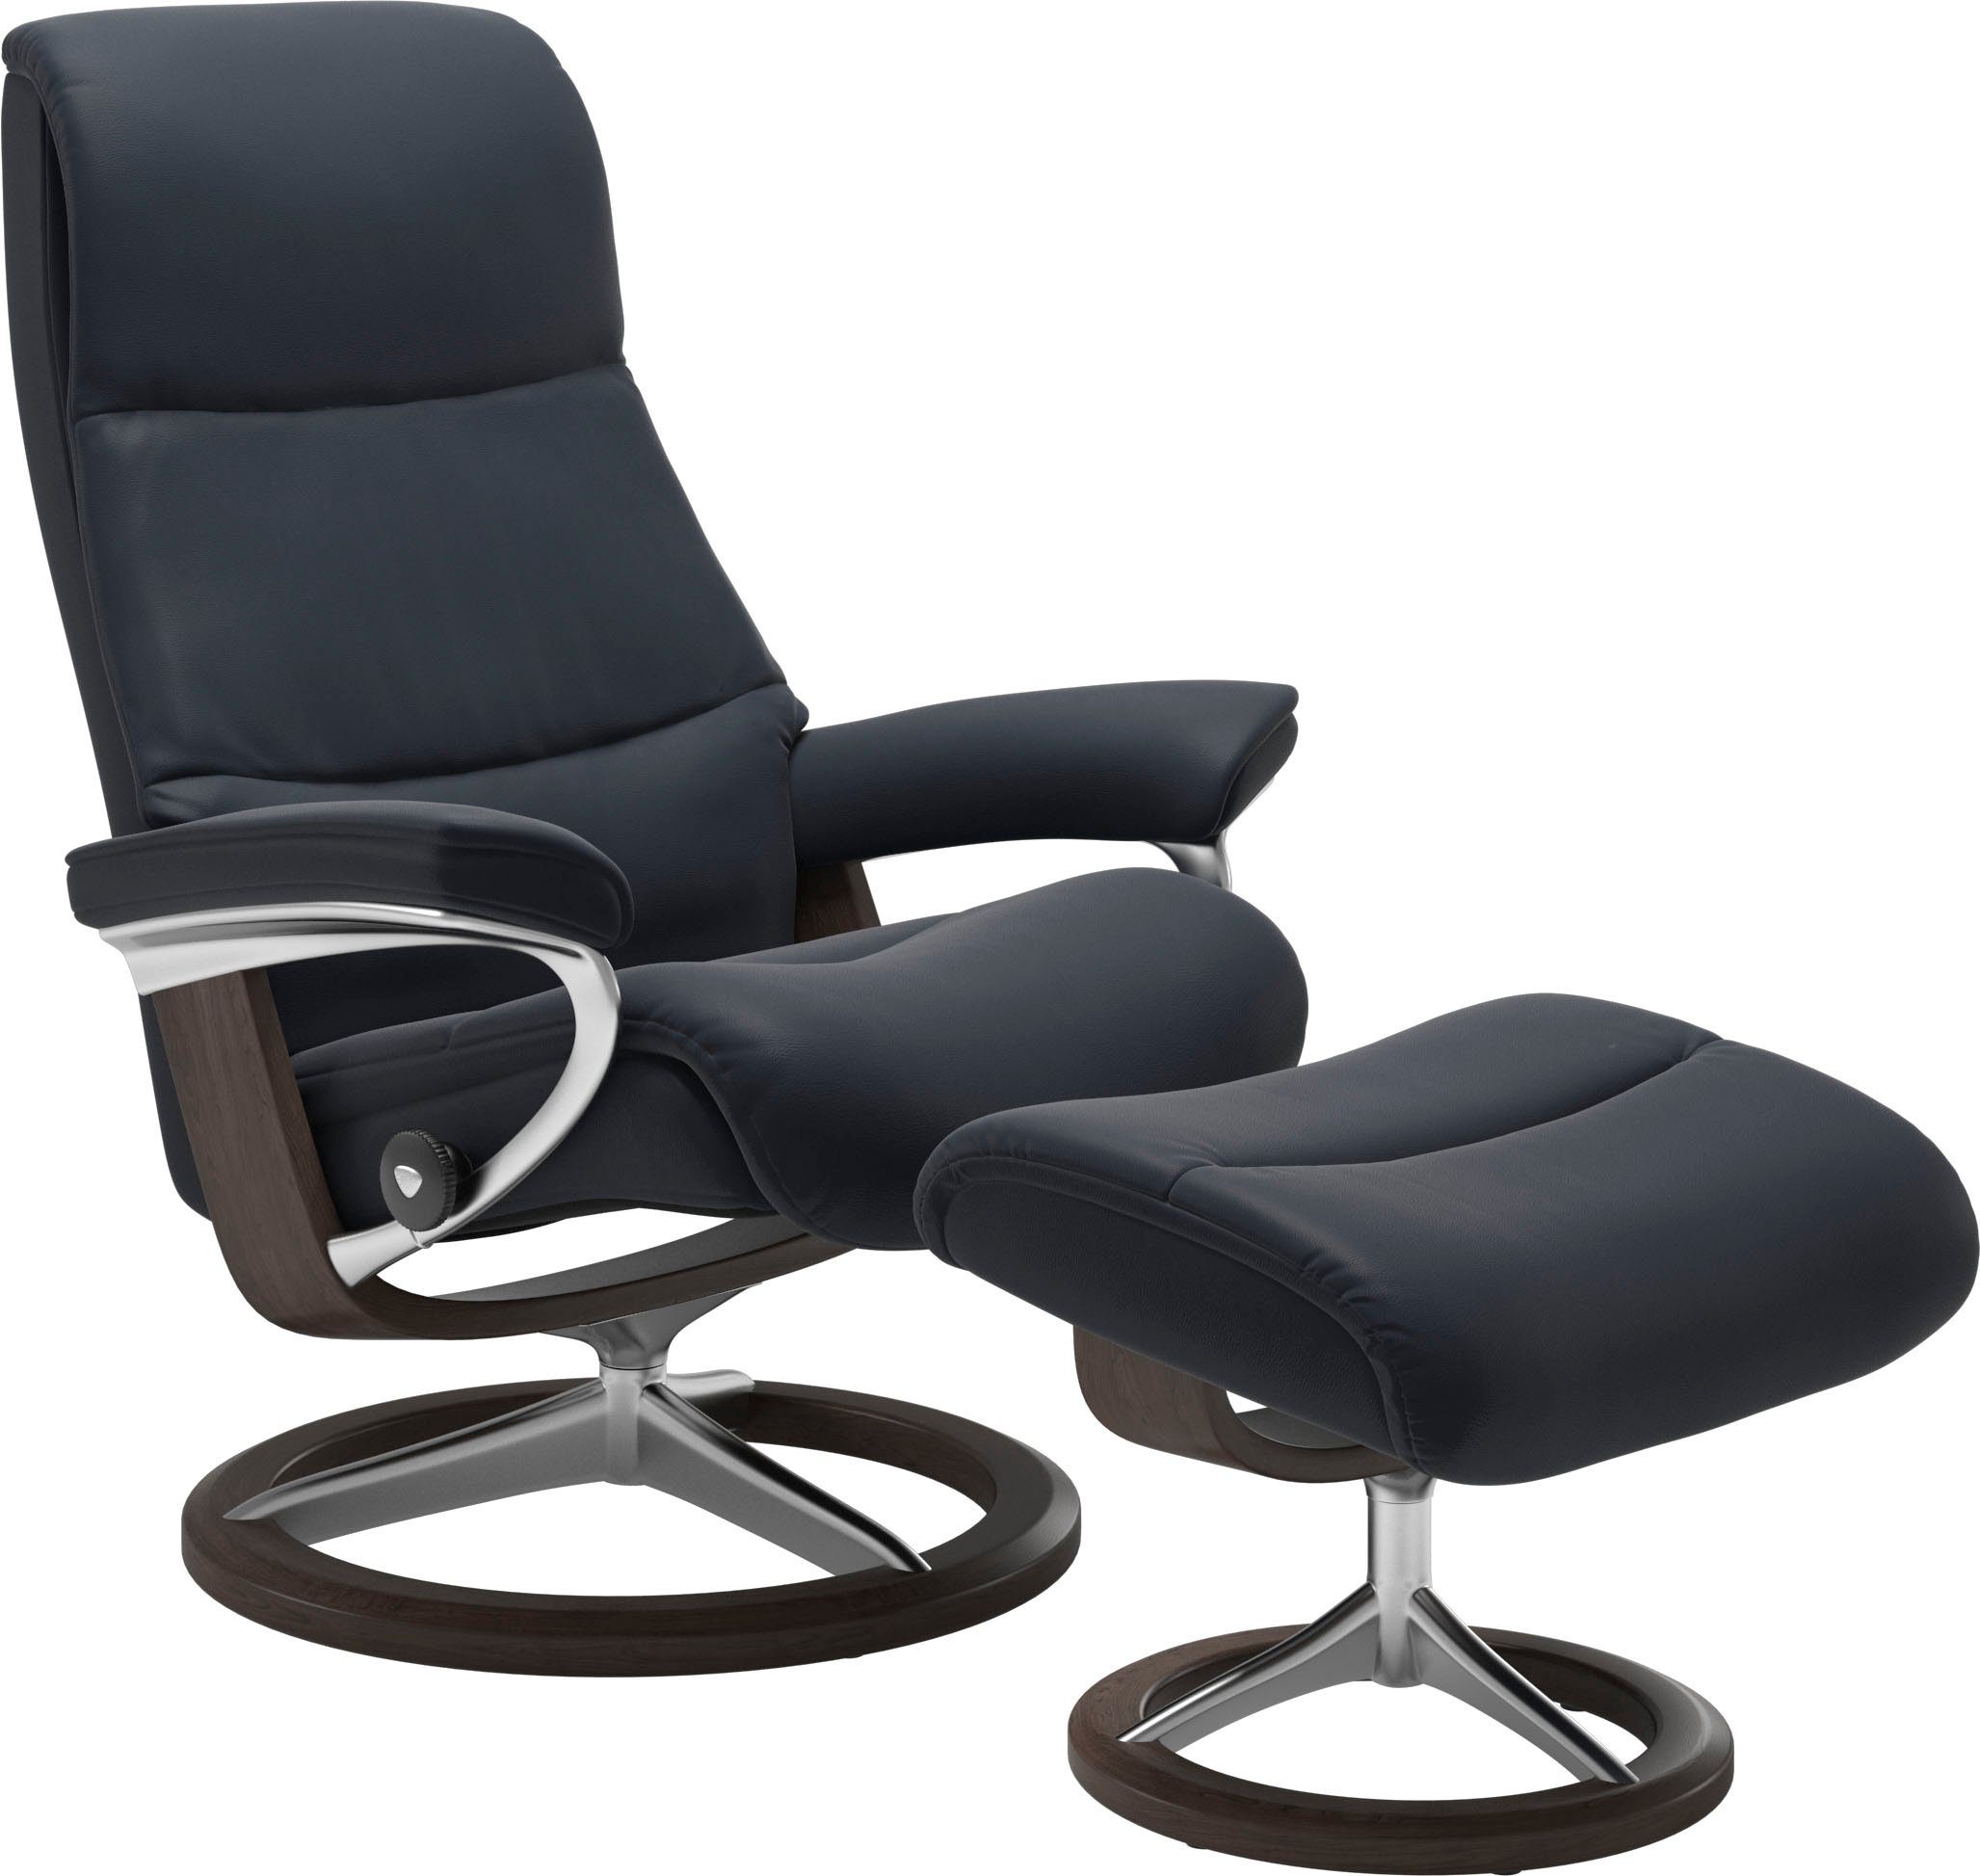 S,Gestell Signature View, Wenge Relaxsessel mit Stressless® Base, Größe